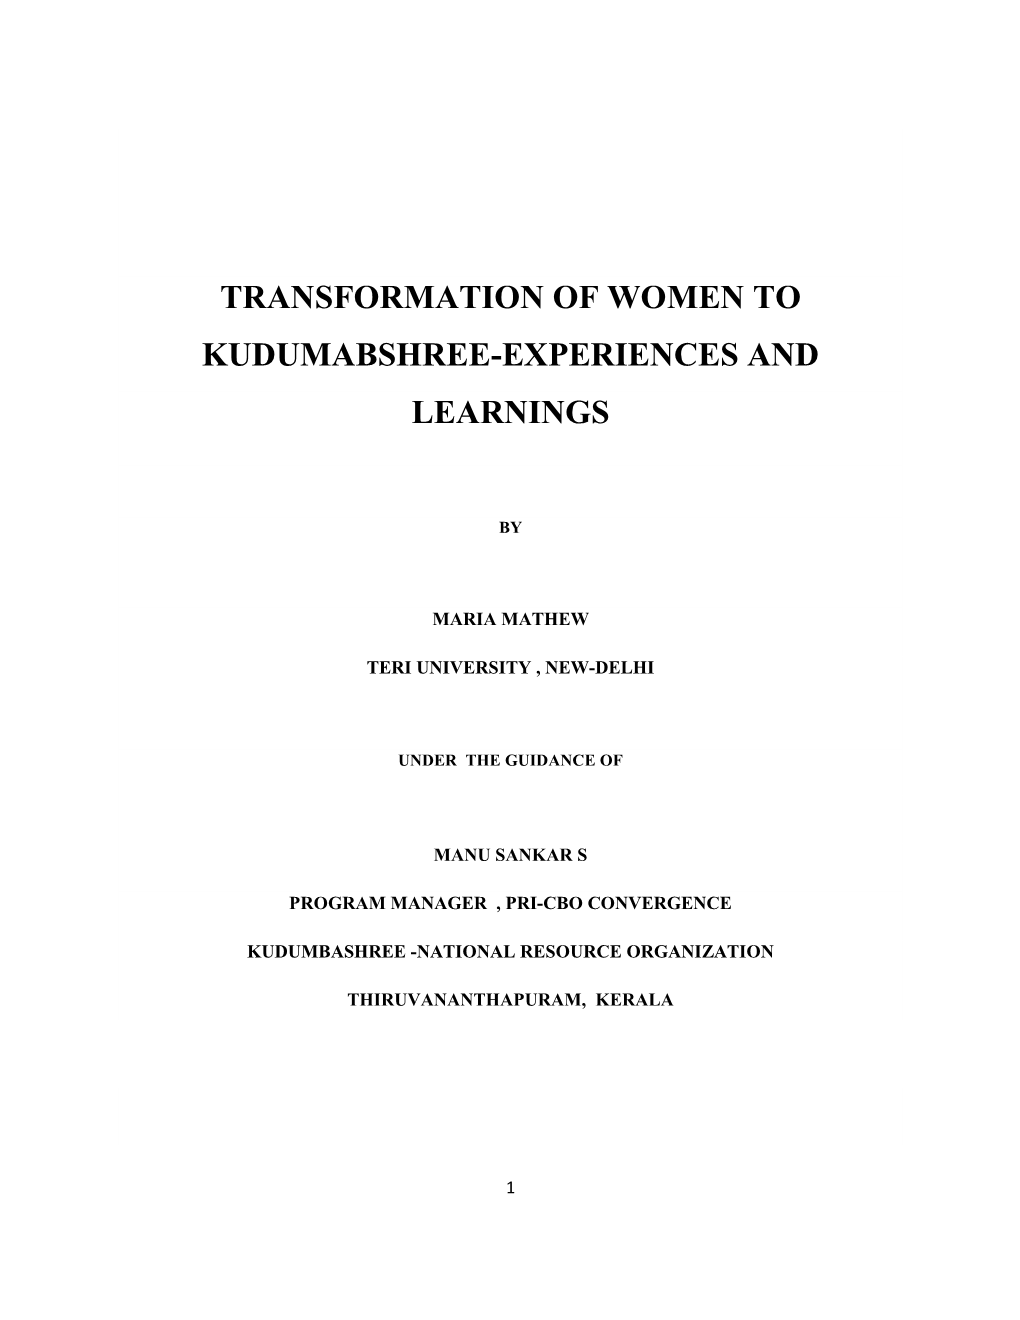 Transformation of Women to Kudumabshree-Experiences and Learnings